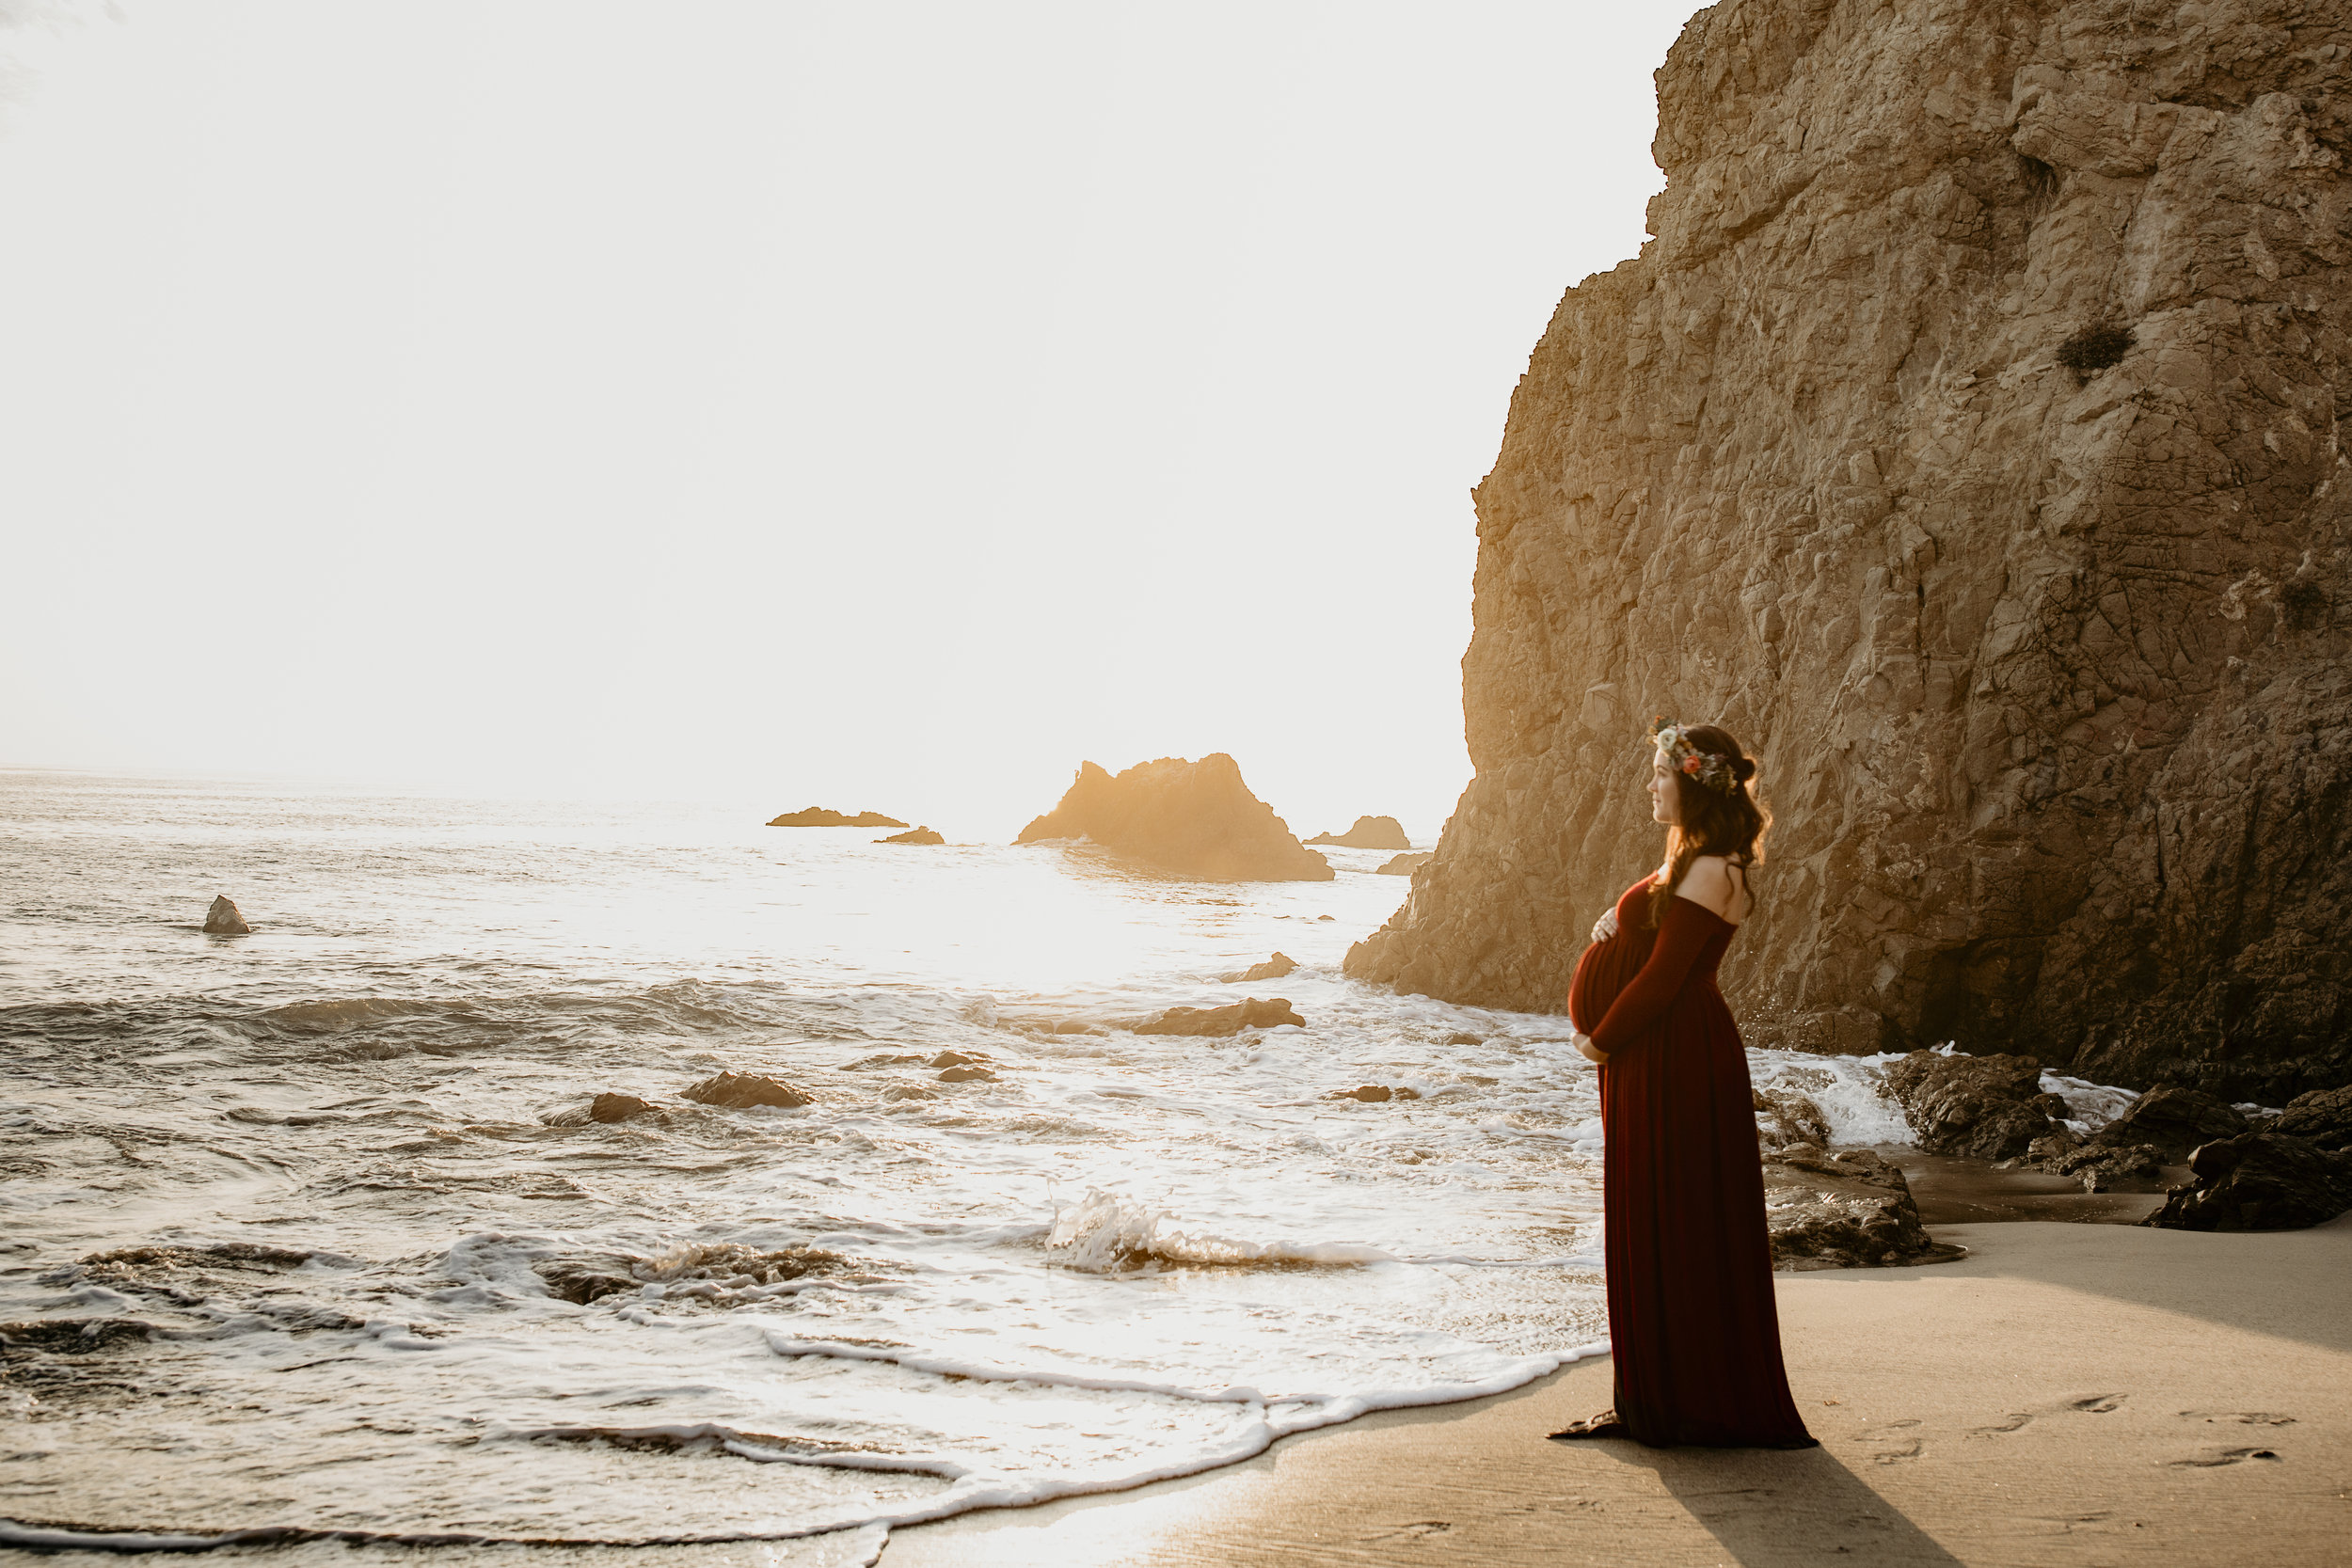 photographer bre thurston | san francisco bay area california | lifestyle maternity photography | outdoors on location beach mermaid flower crown and sunset shoot